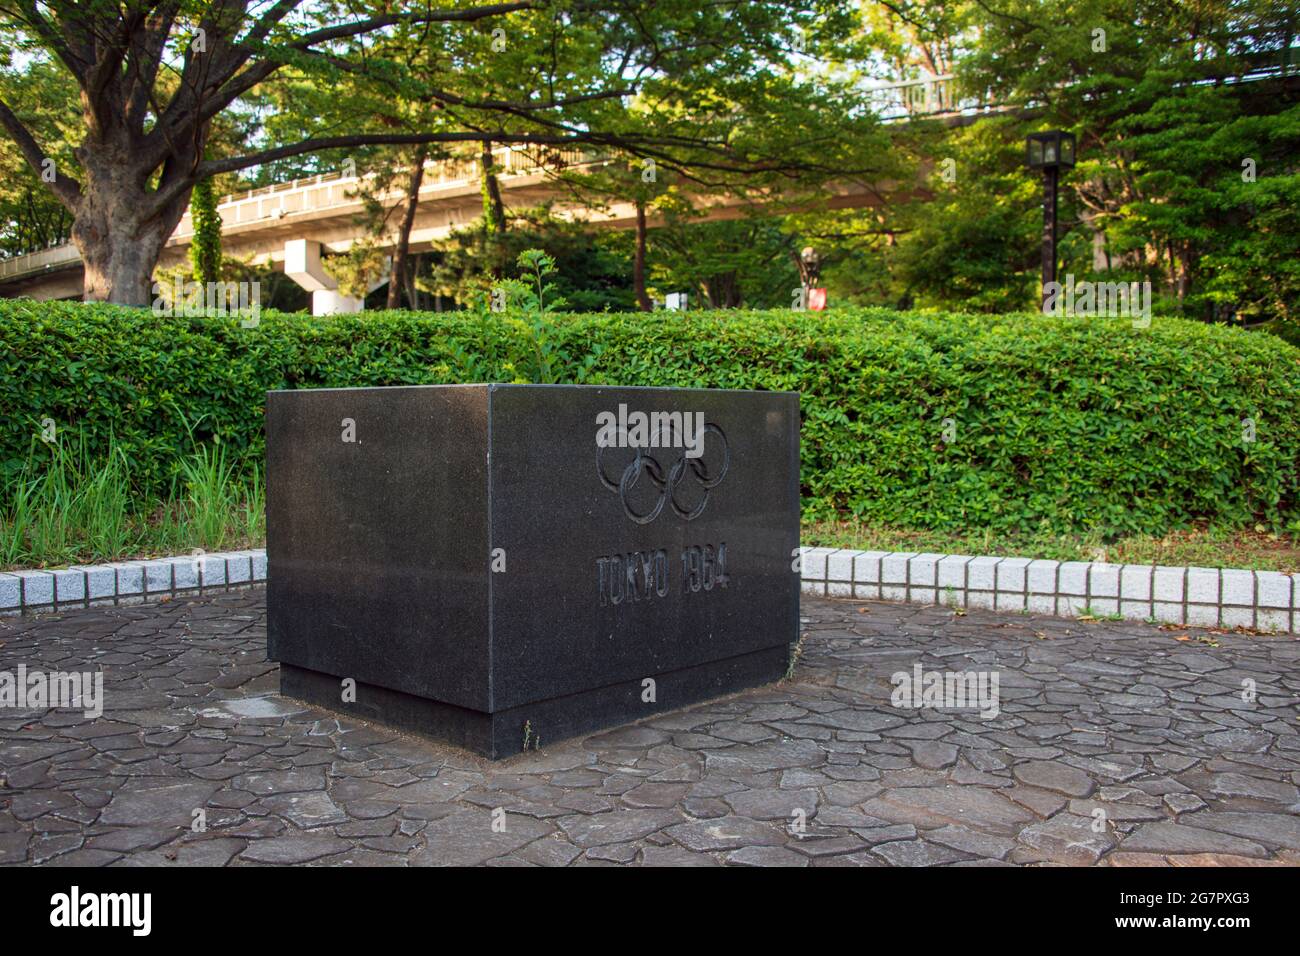 A memorial stone commemorating the 1964 Tokyo Olympics stands inside Yoyogi Park in Tokyo on 21 June 2021. The park was originally a US military housing complex, which was returned to Japan for the Olympics and turned into the athletes' village. A bronze legend on top of the memorial stone lists all of the facilities that were available to the 7000 athletes and entourage, including training facilities, a swimming pool, theater, sauna and dining hall. Robert Gilhooly photo Stock Photo